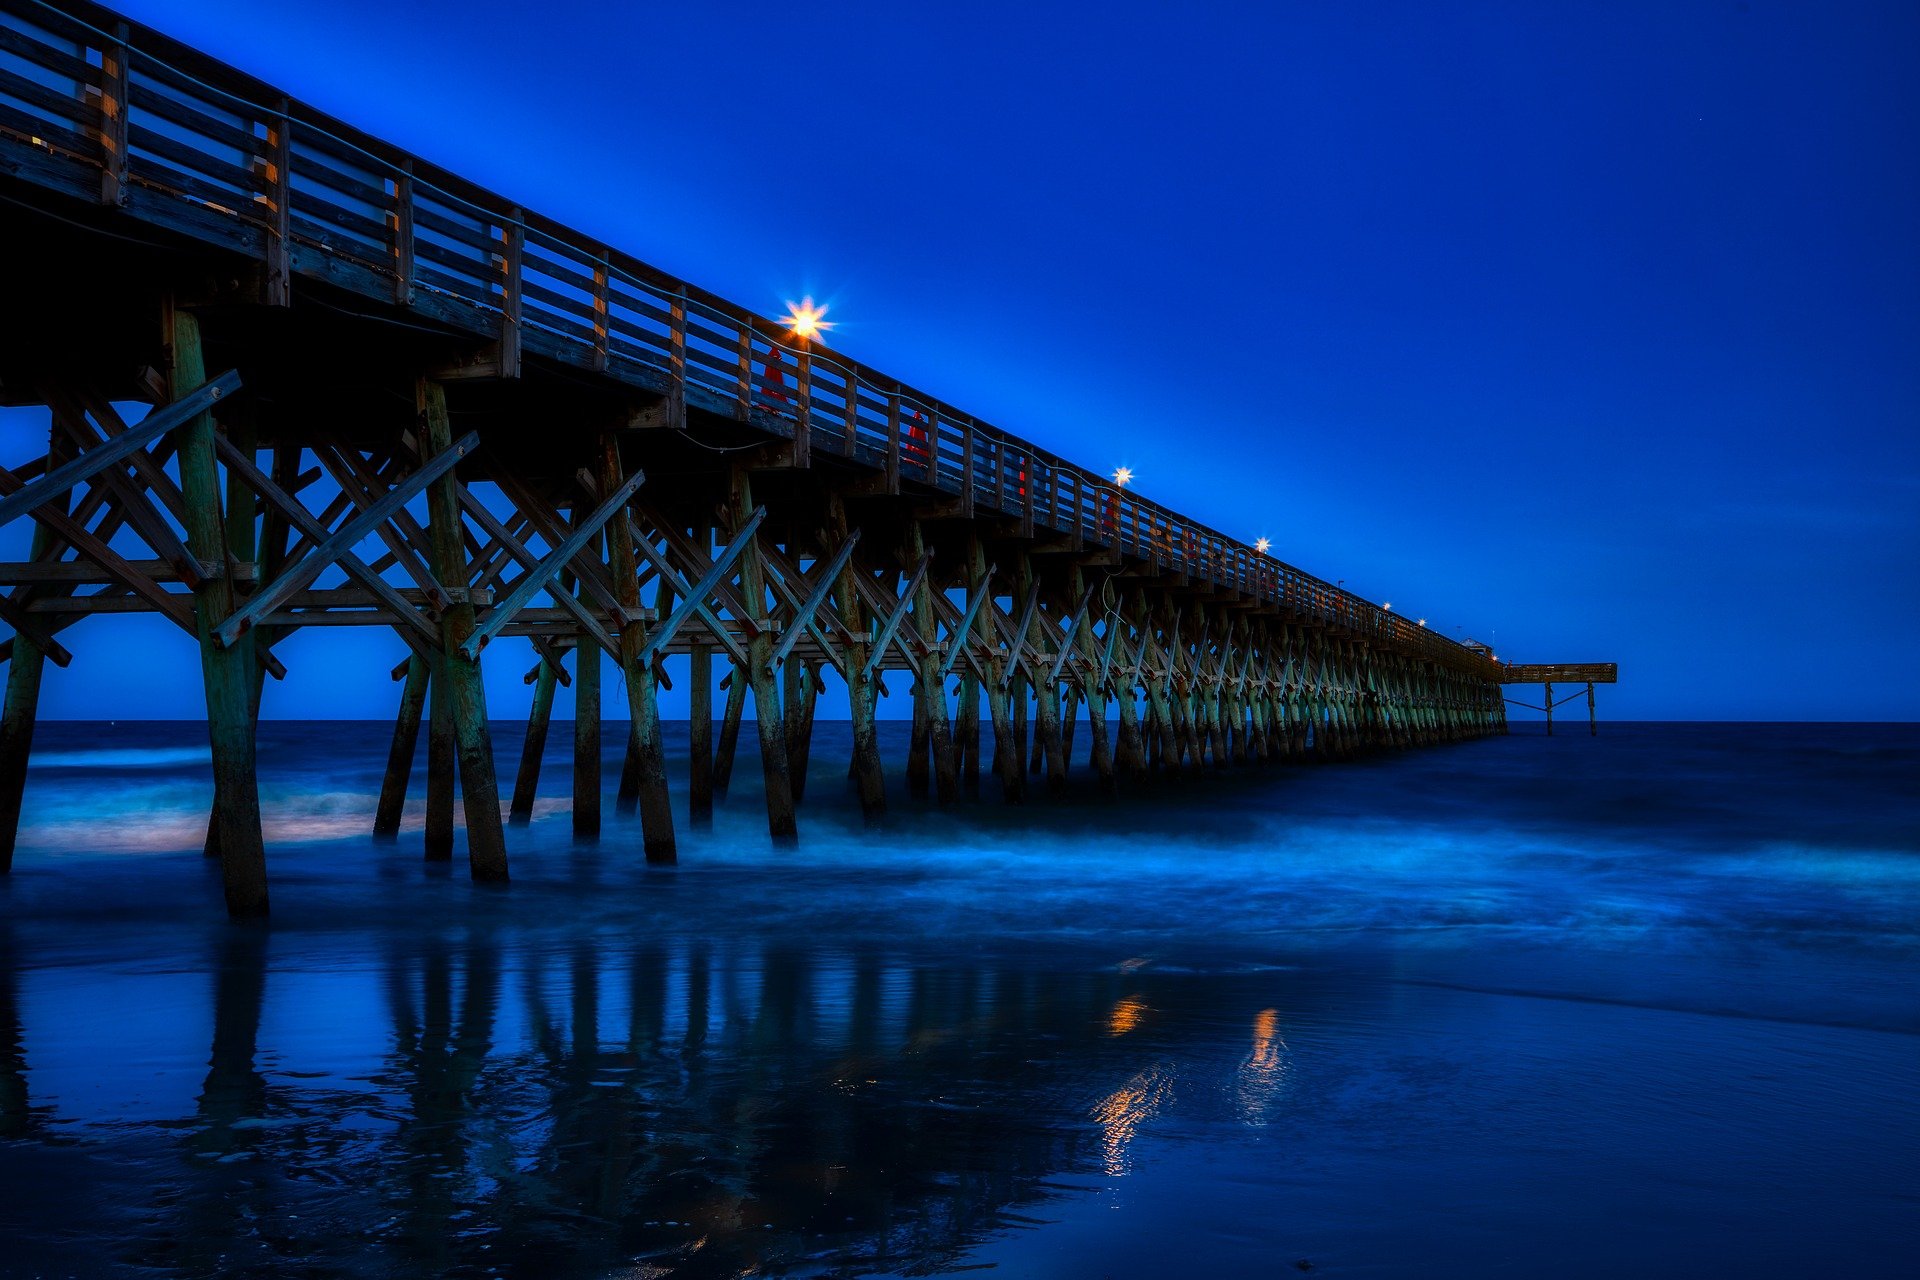 A pier stretches into the ocean at dusk.